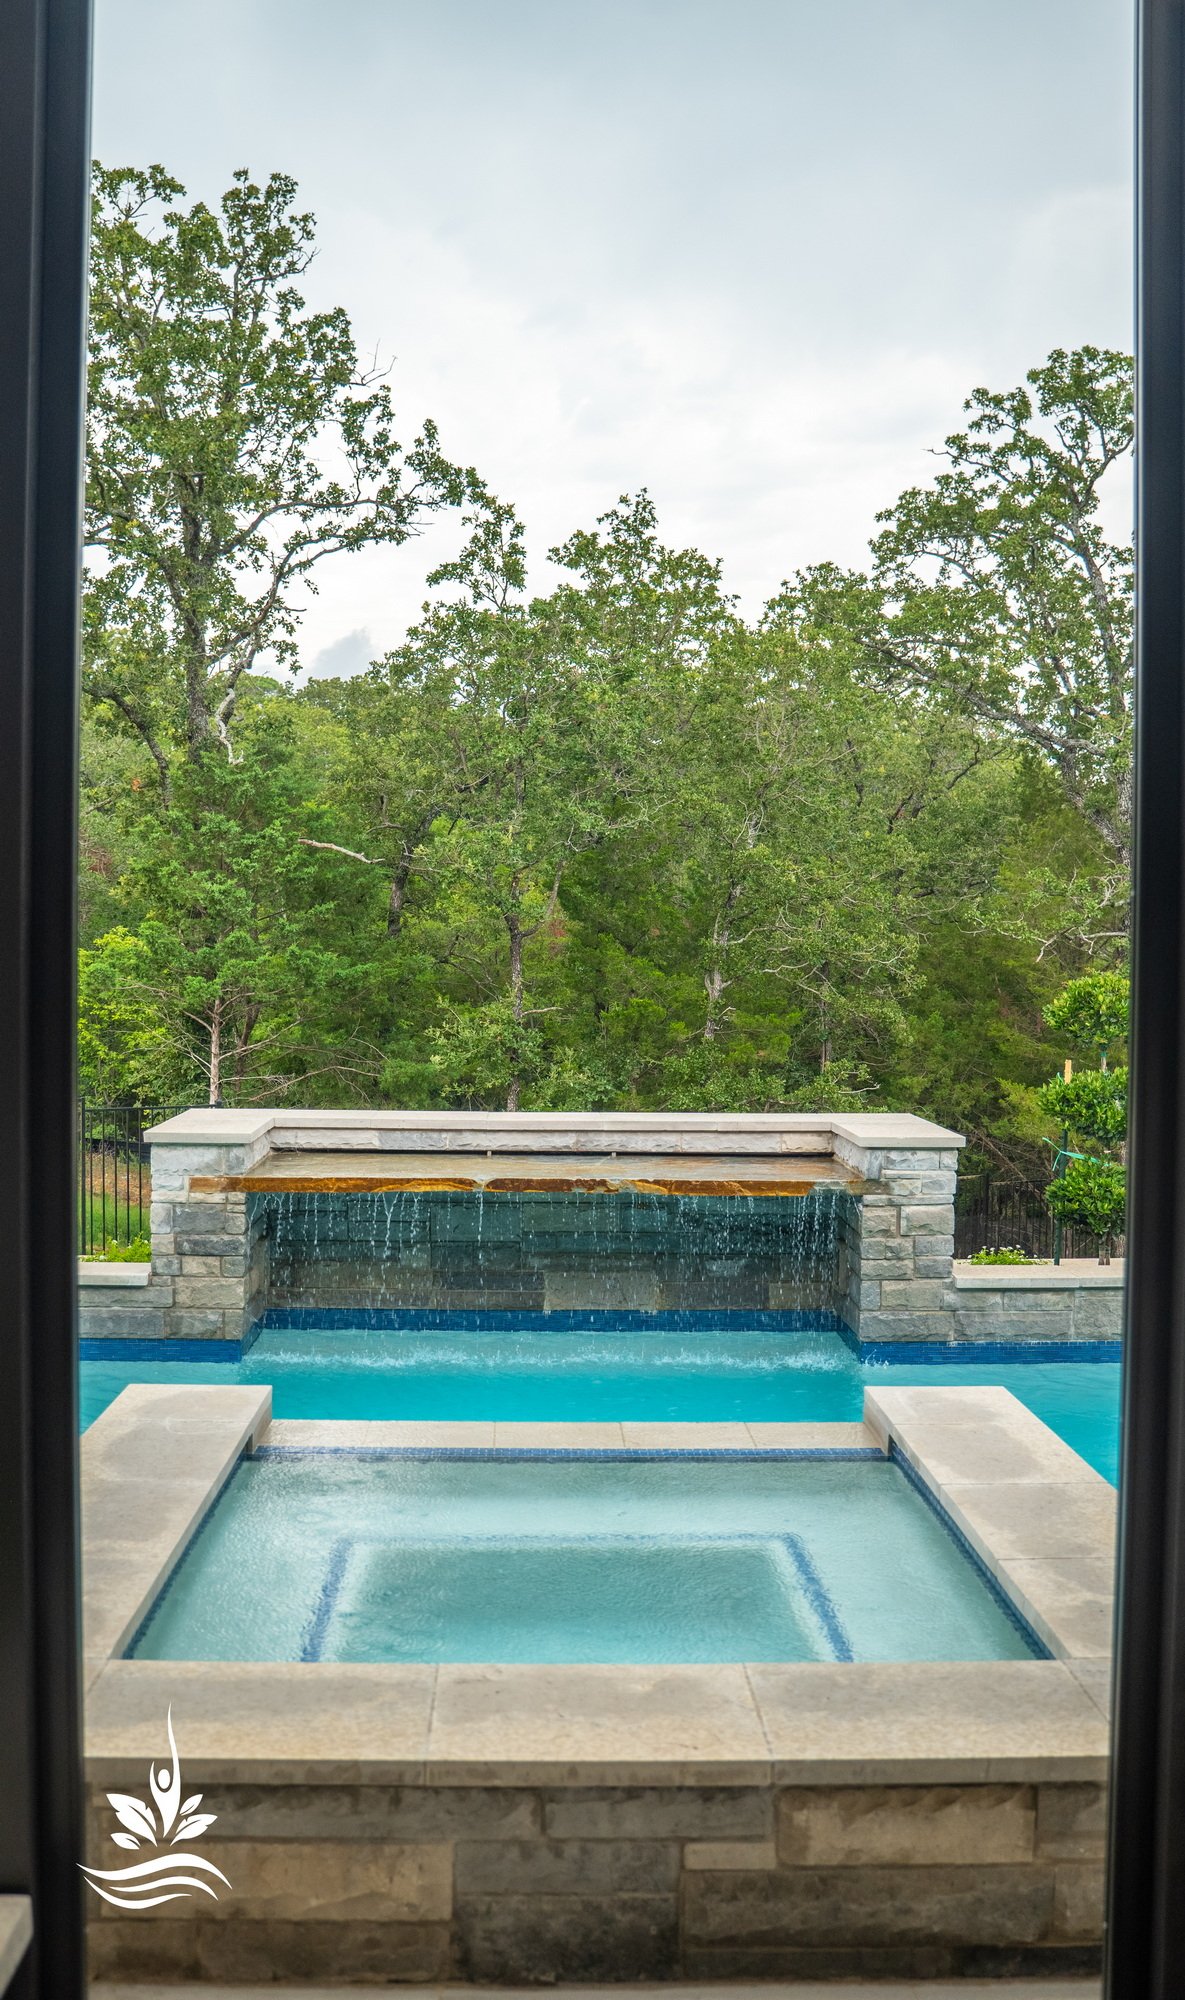 Swimming pool and spa overlook